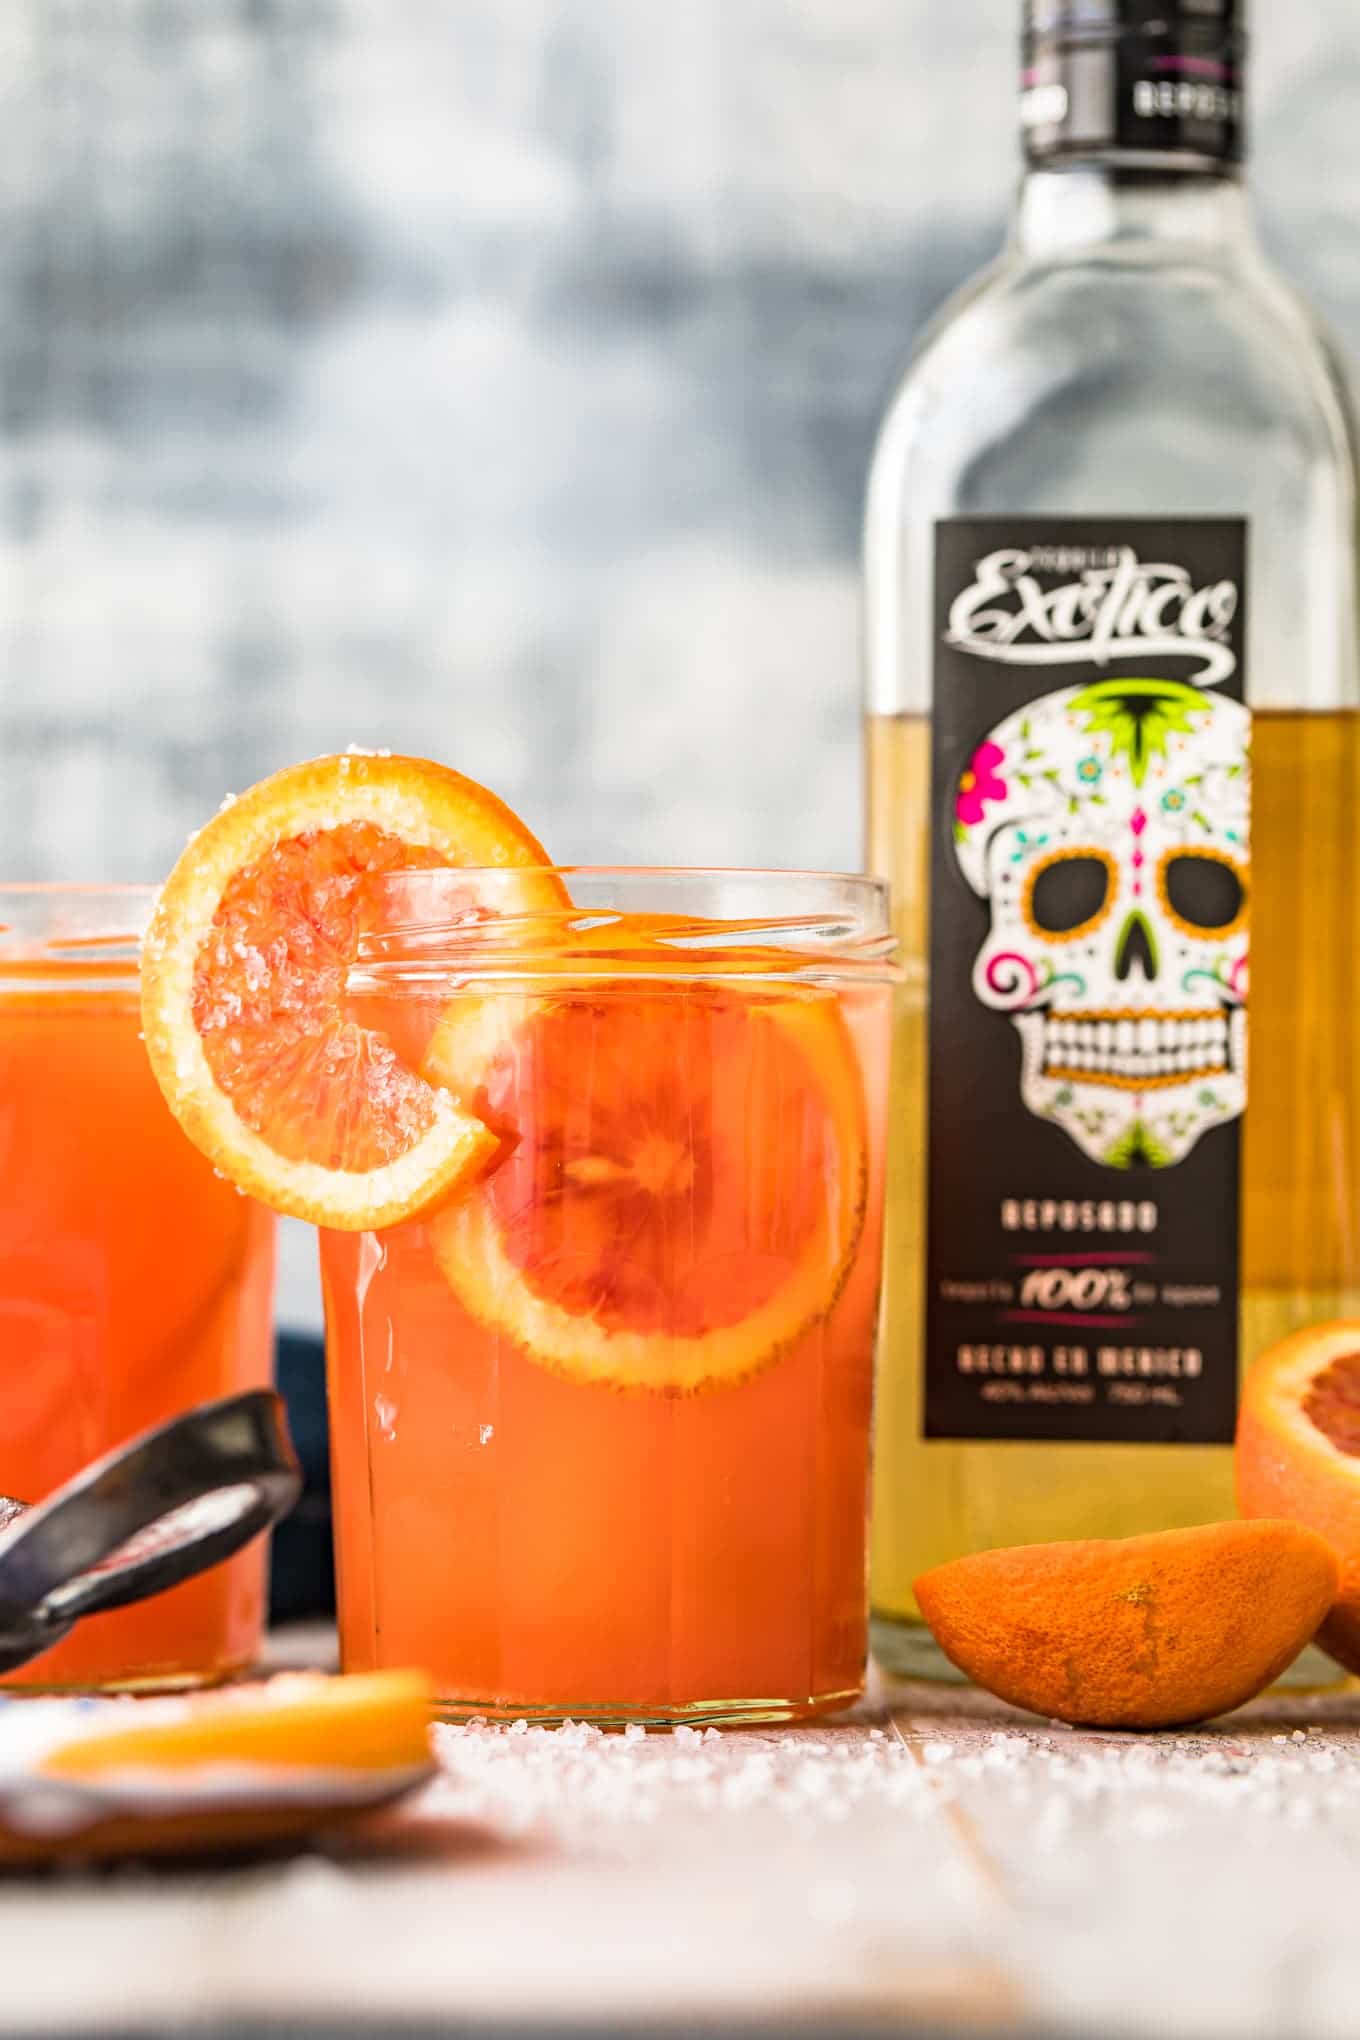 A blood orange paloma cocktail in front of a bottle of tequila